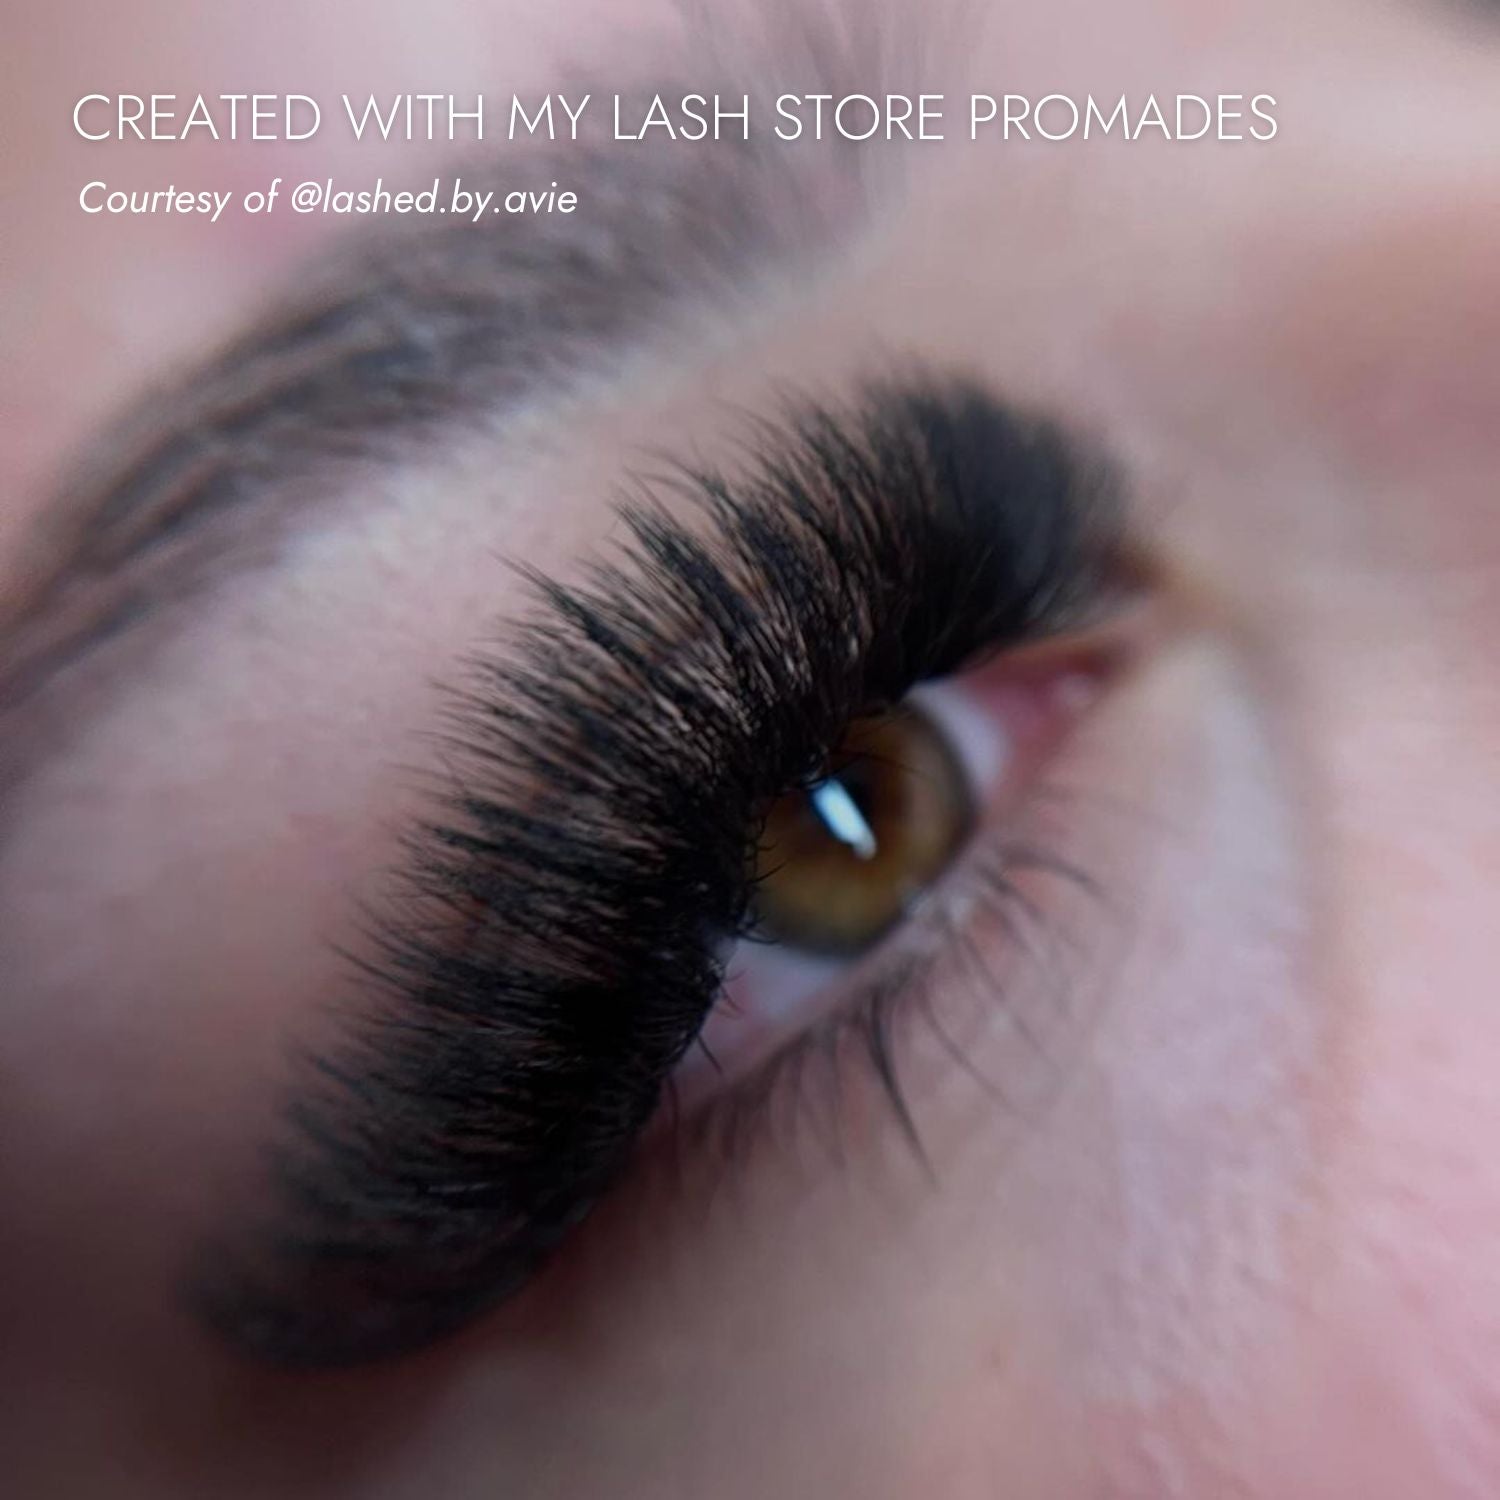 7D Loose Promade Fans - My Lash Store